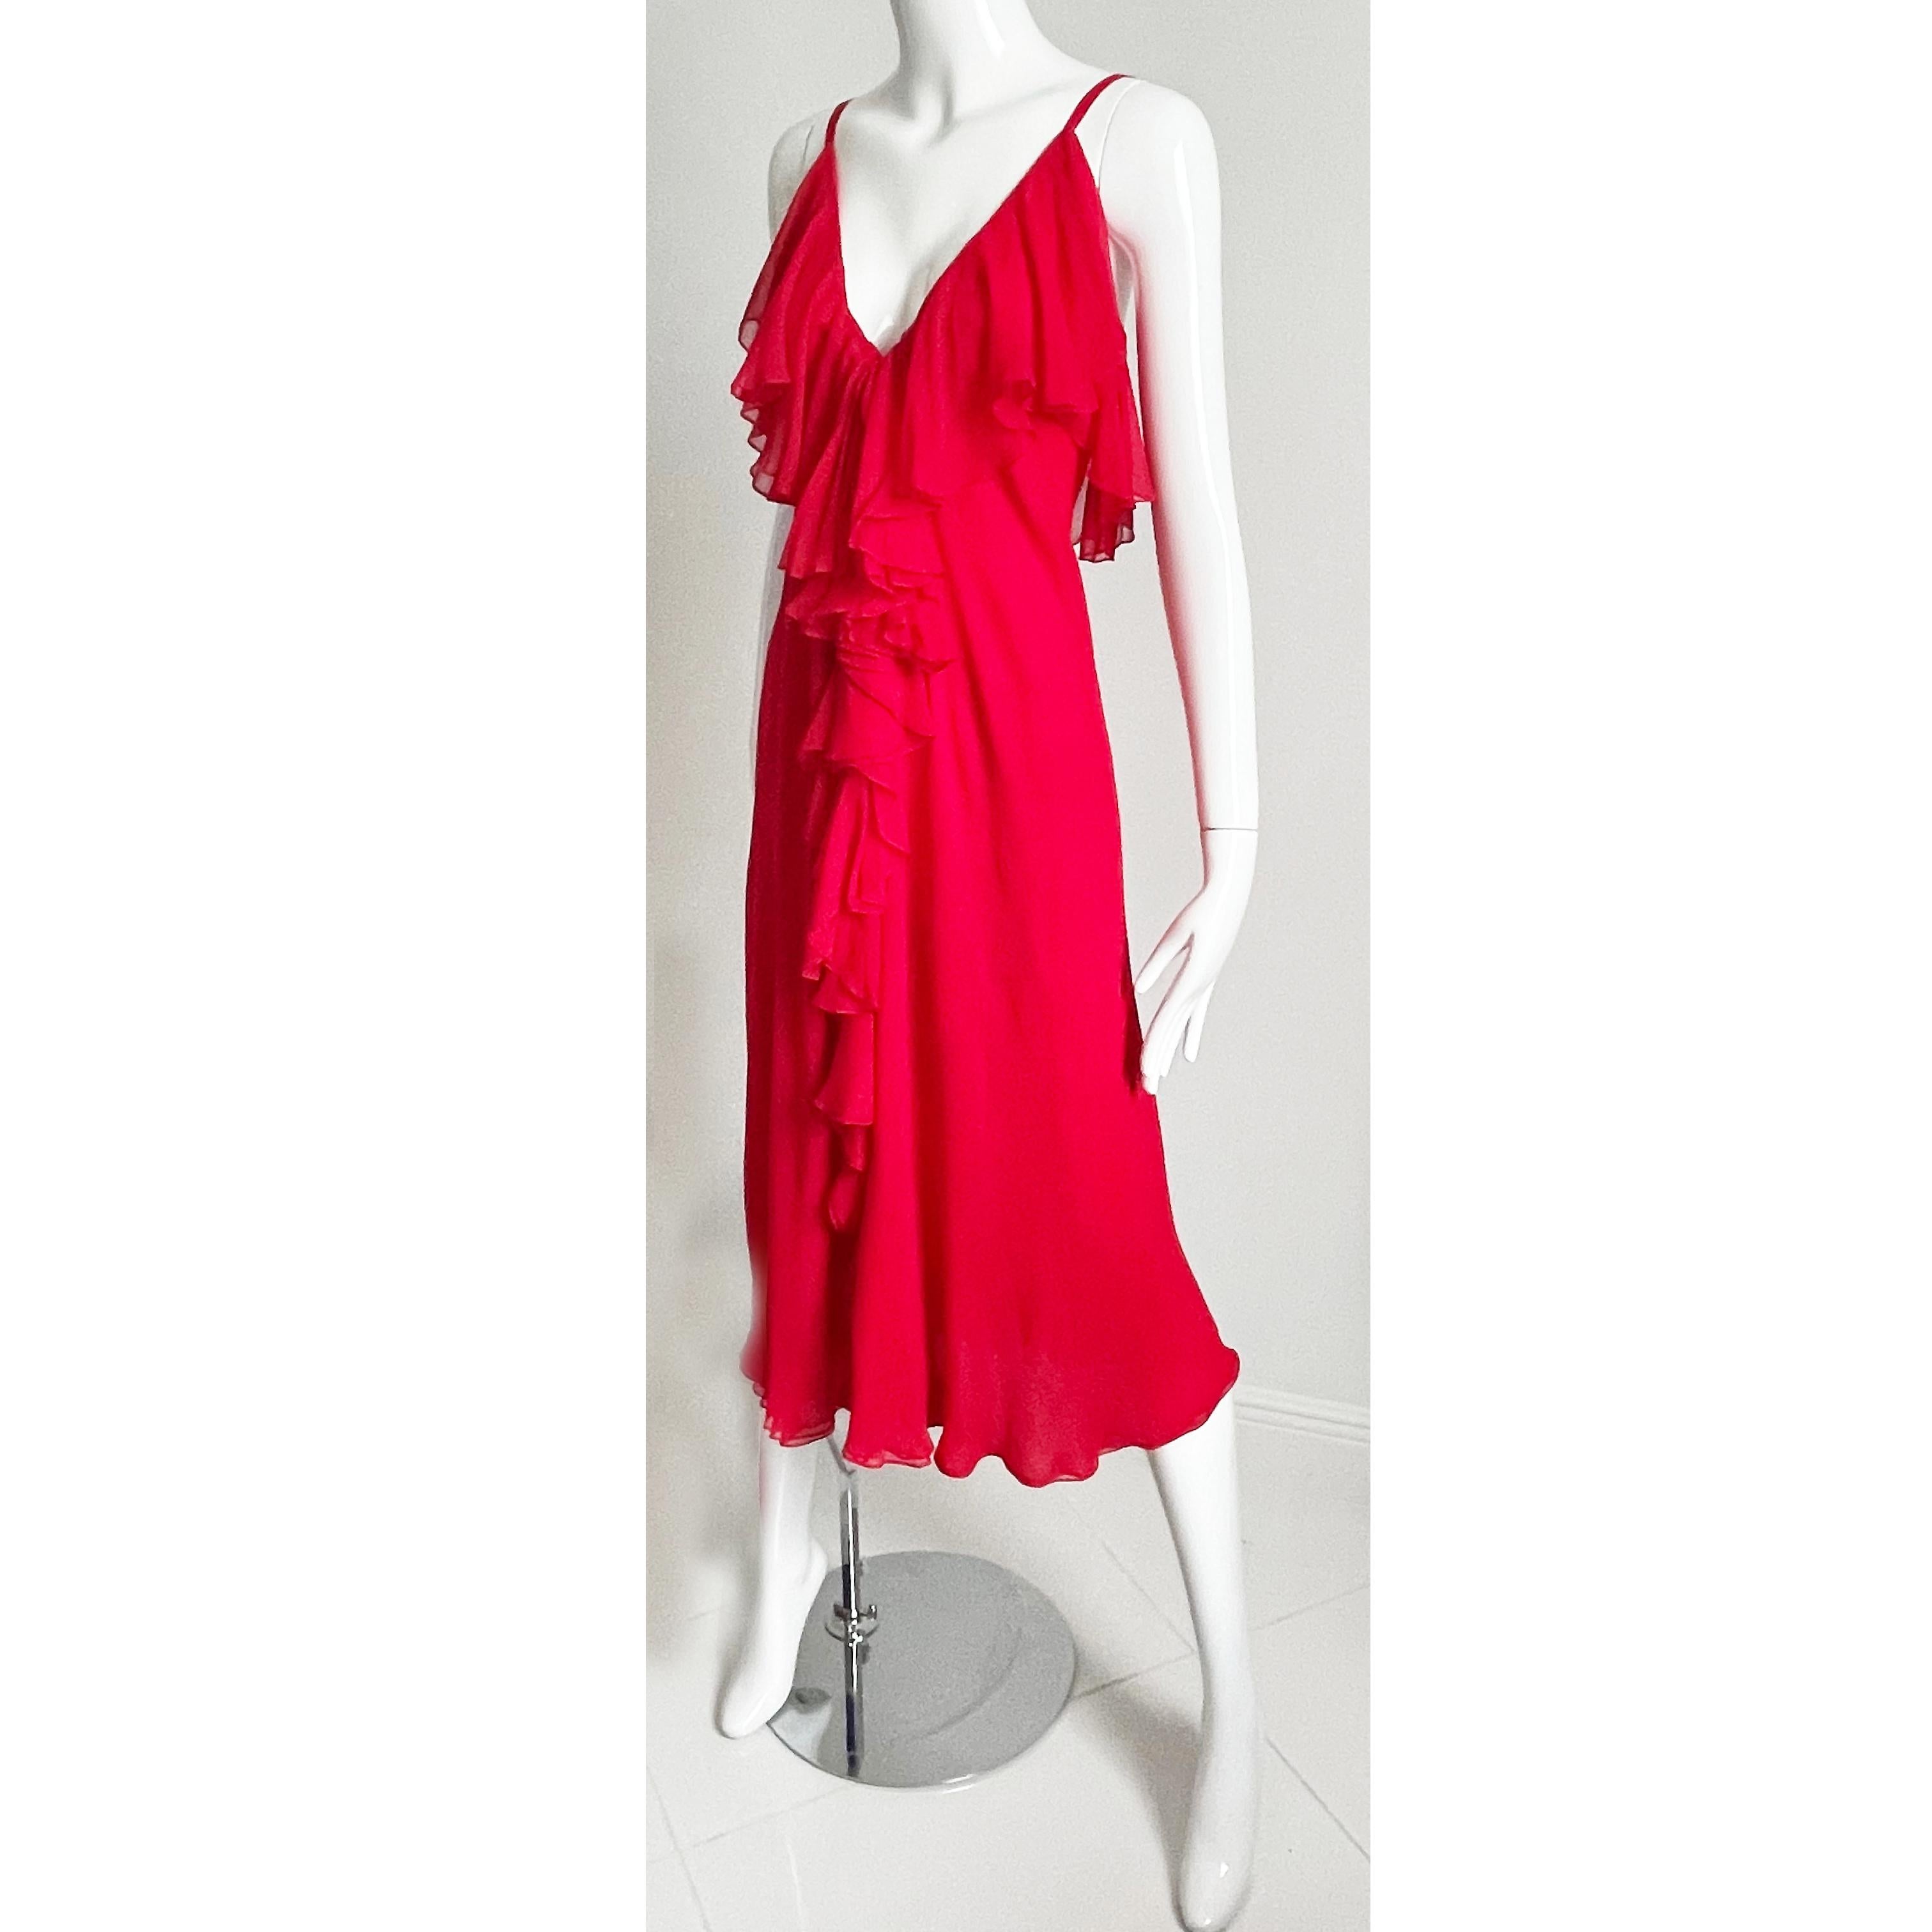 Pauline Trigere Dress and Shawl 2pc Set Red Silk Chiffon Loose Ruffles Vintage For Sale 3